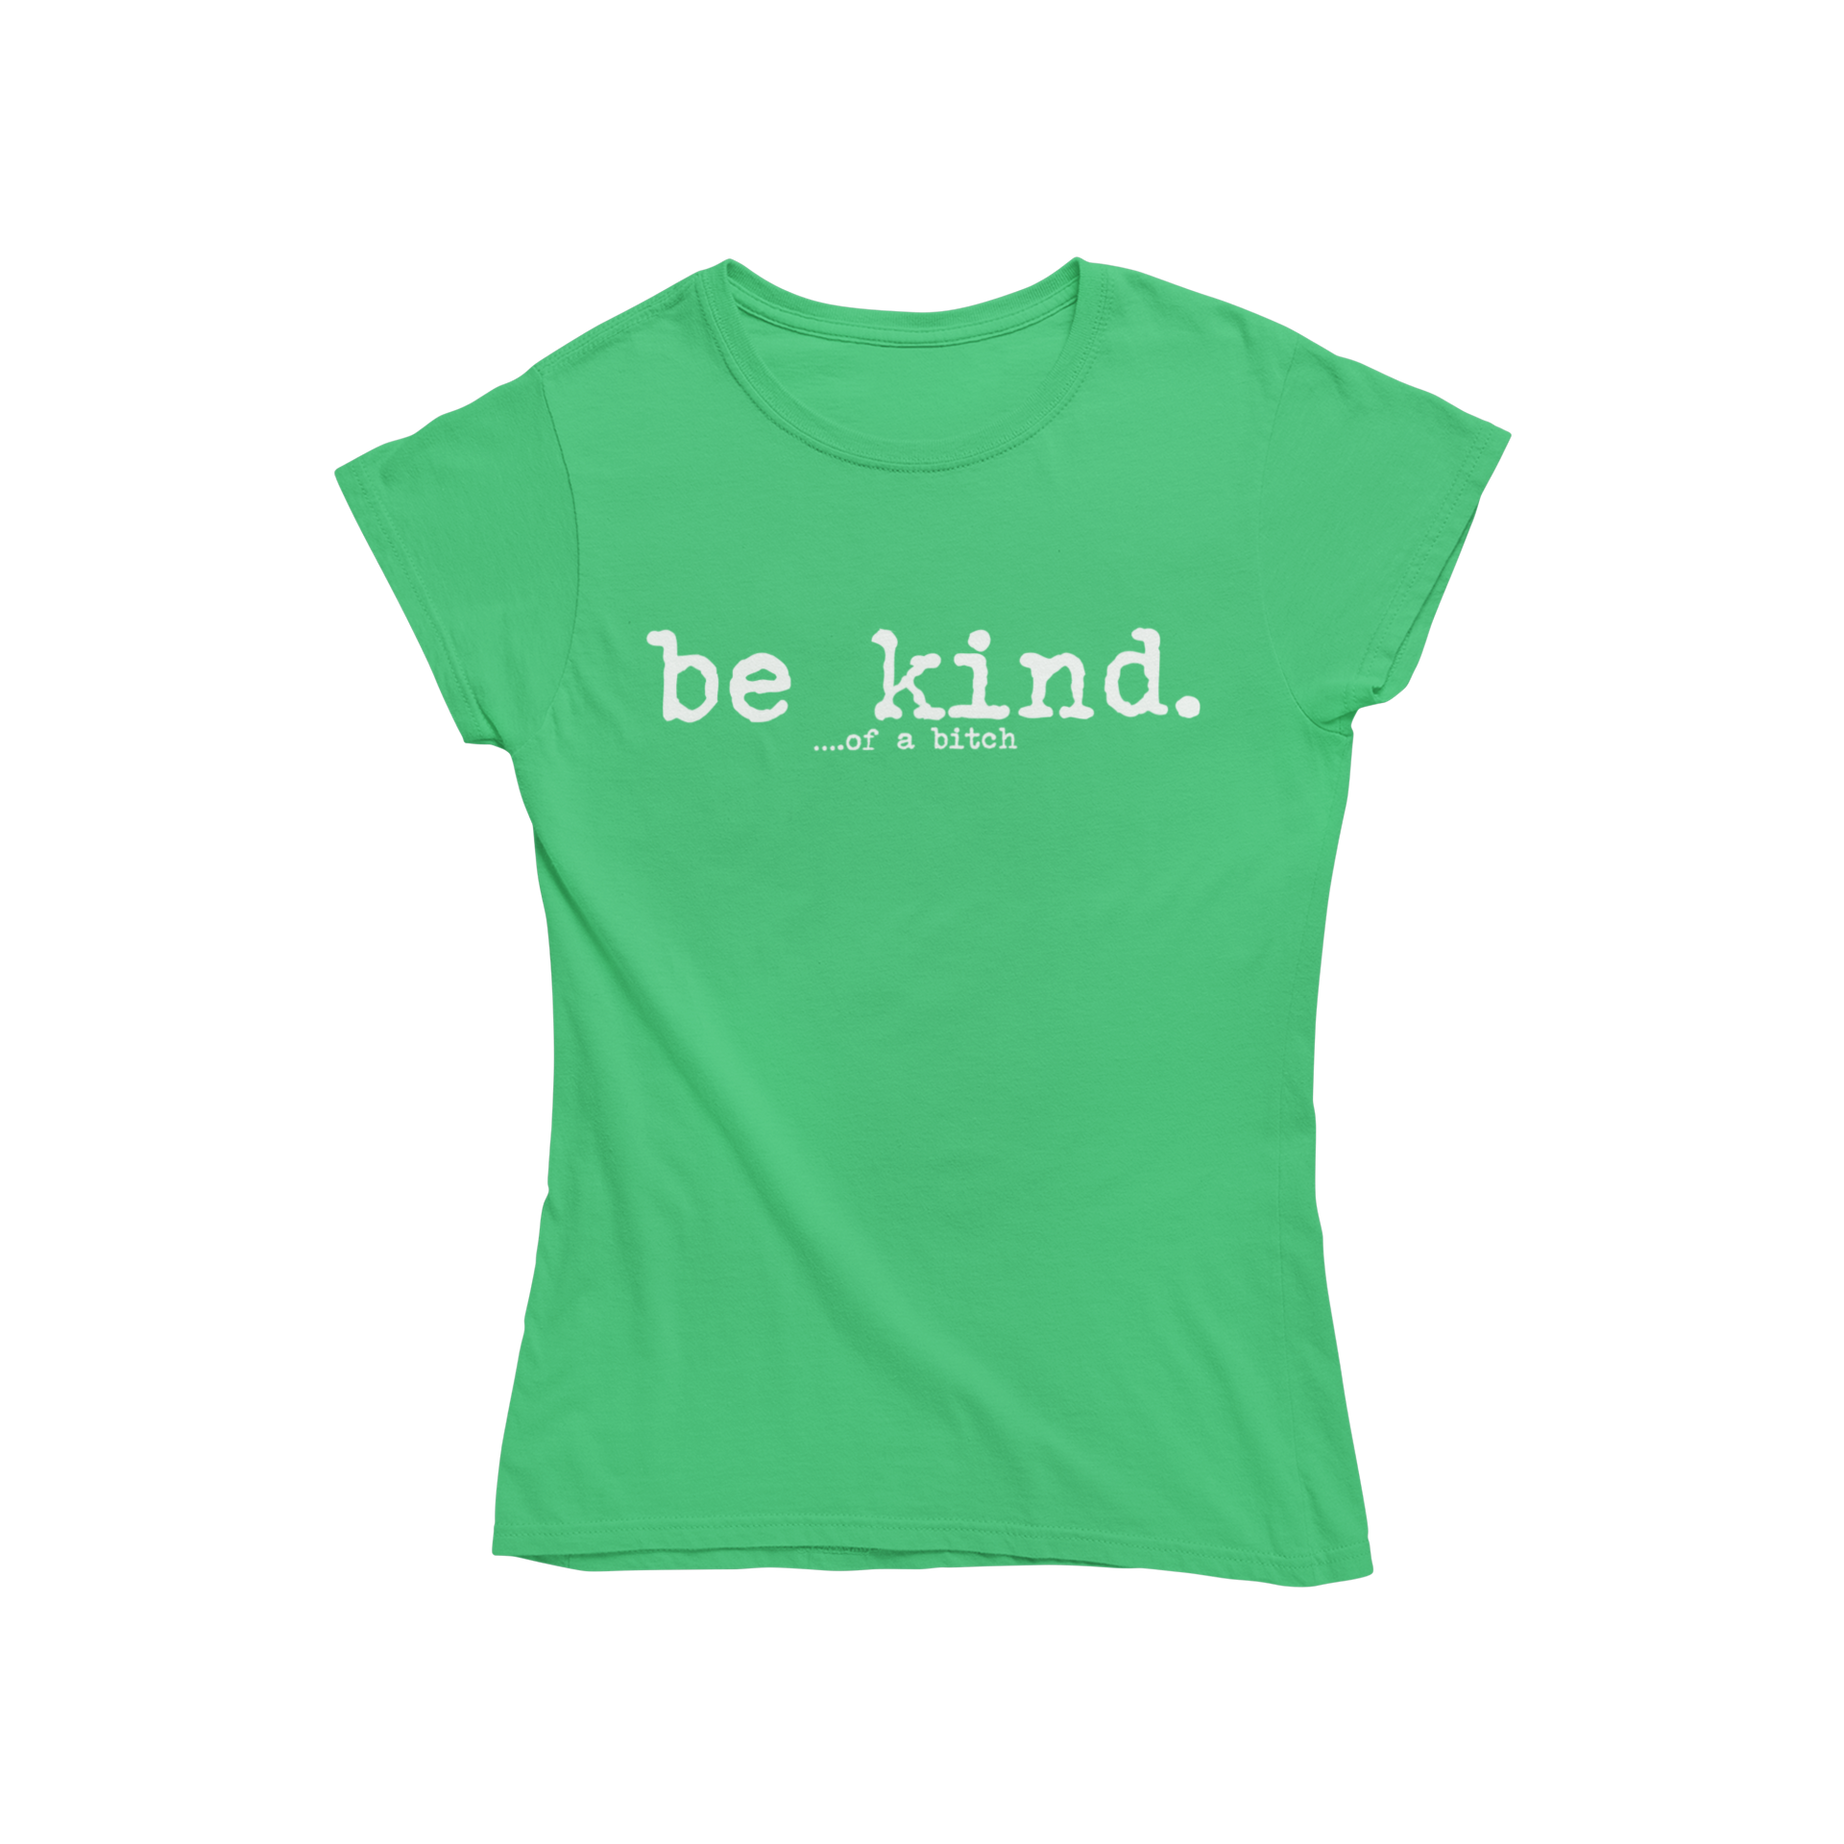 Spread positivity in our Be Kind Of Womens T-shirt. This fitted t-shirt features the playful slogan 'be kind of a bitch' to remind everyone to embrace their fierce and sassy side. Soft and comfortable, this tee is perfect for everyday wear. (Who says being kind and badass can't go hand in hand?!)